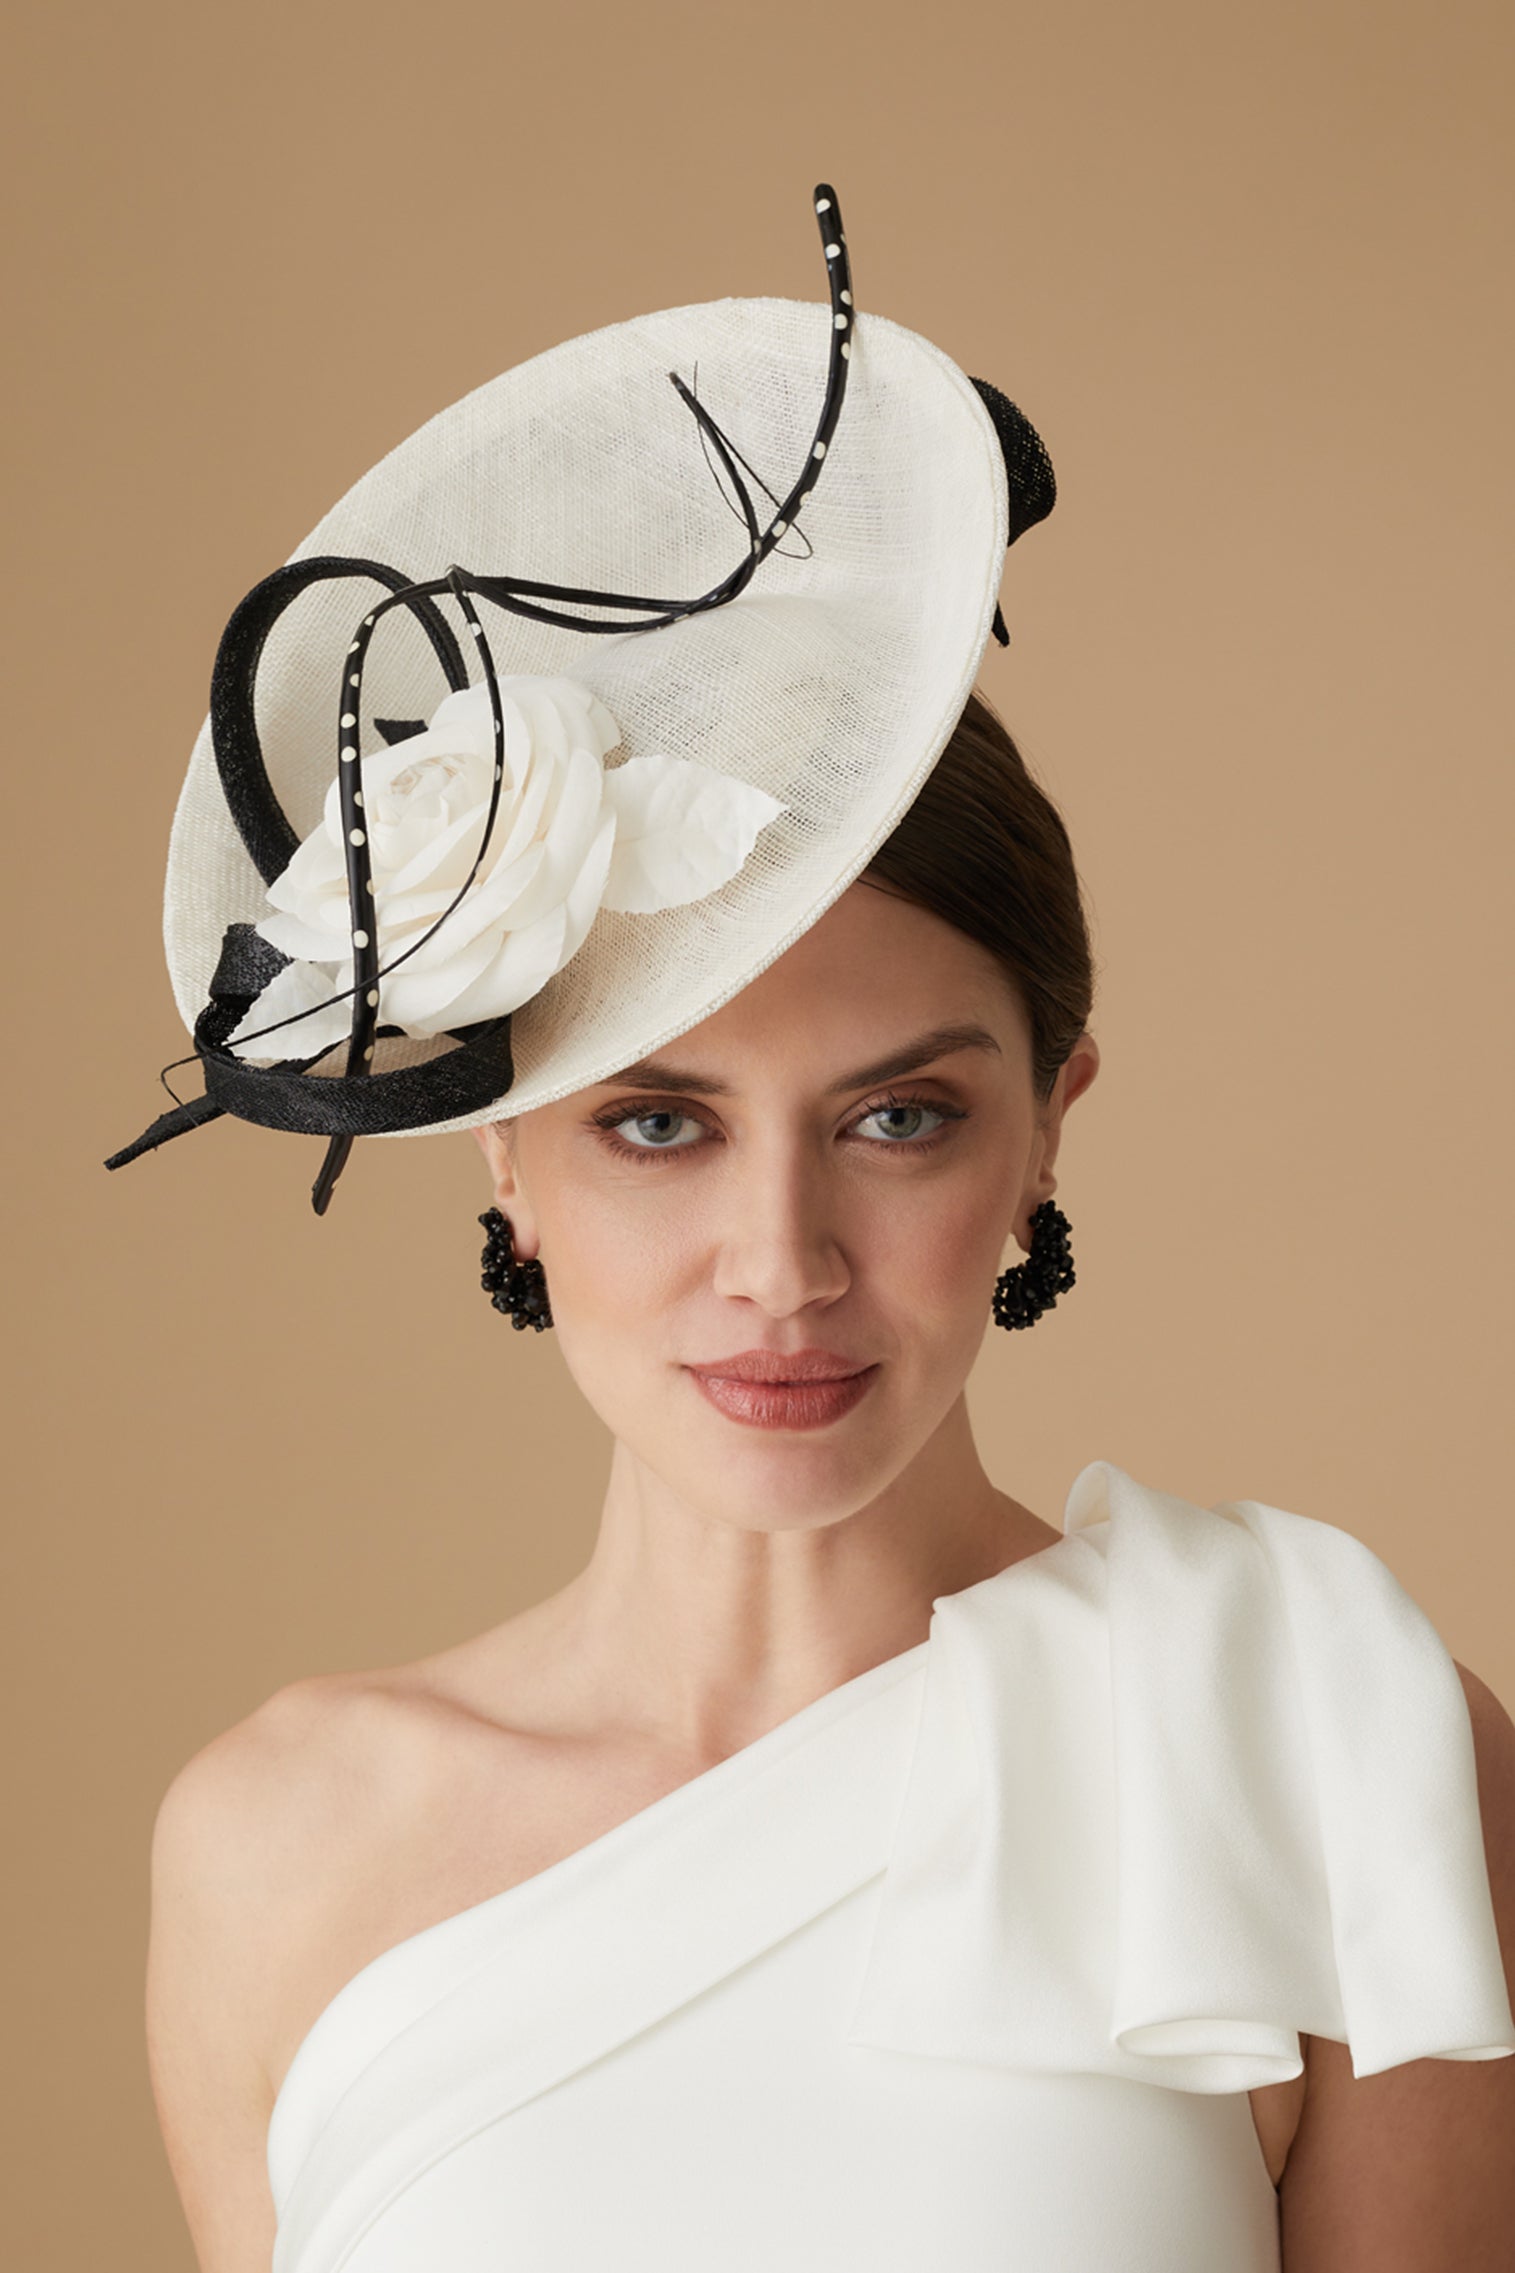 Assam White and Black Saucer Hat - Kentucky Derby Hats for Women - Lock & Co. Hatters London UK